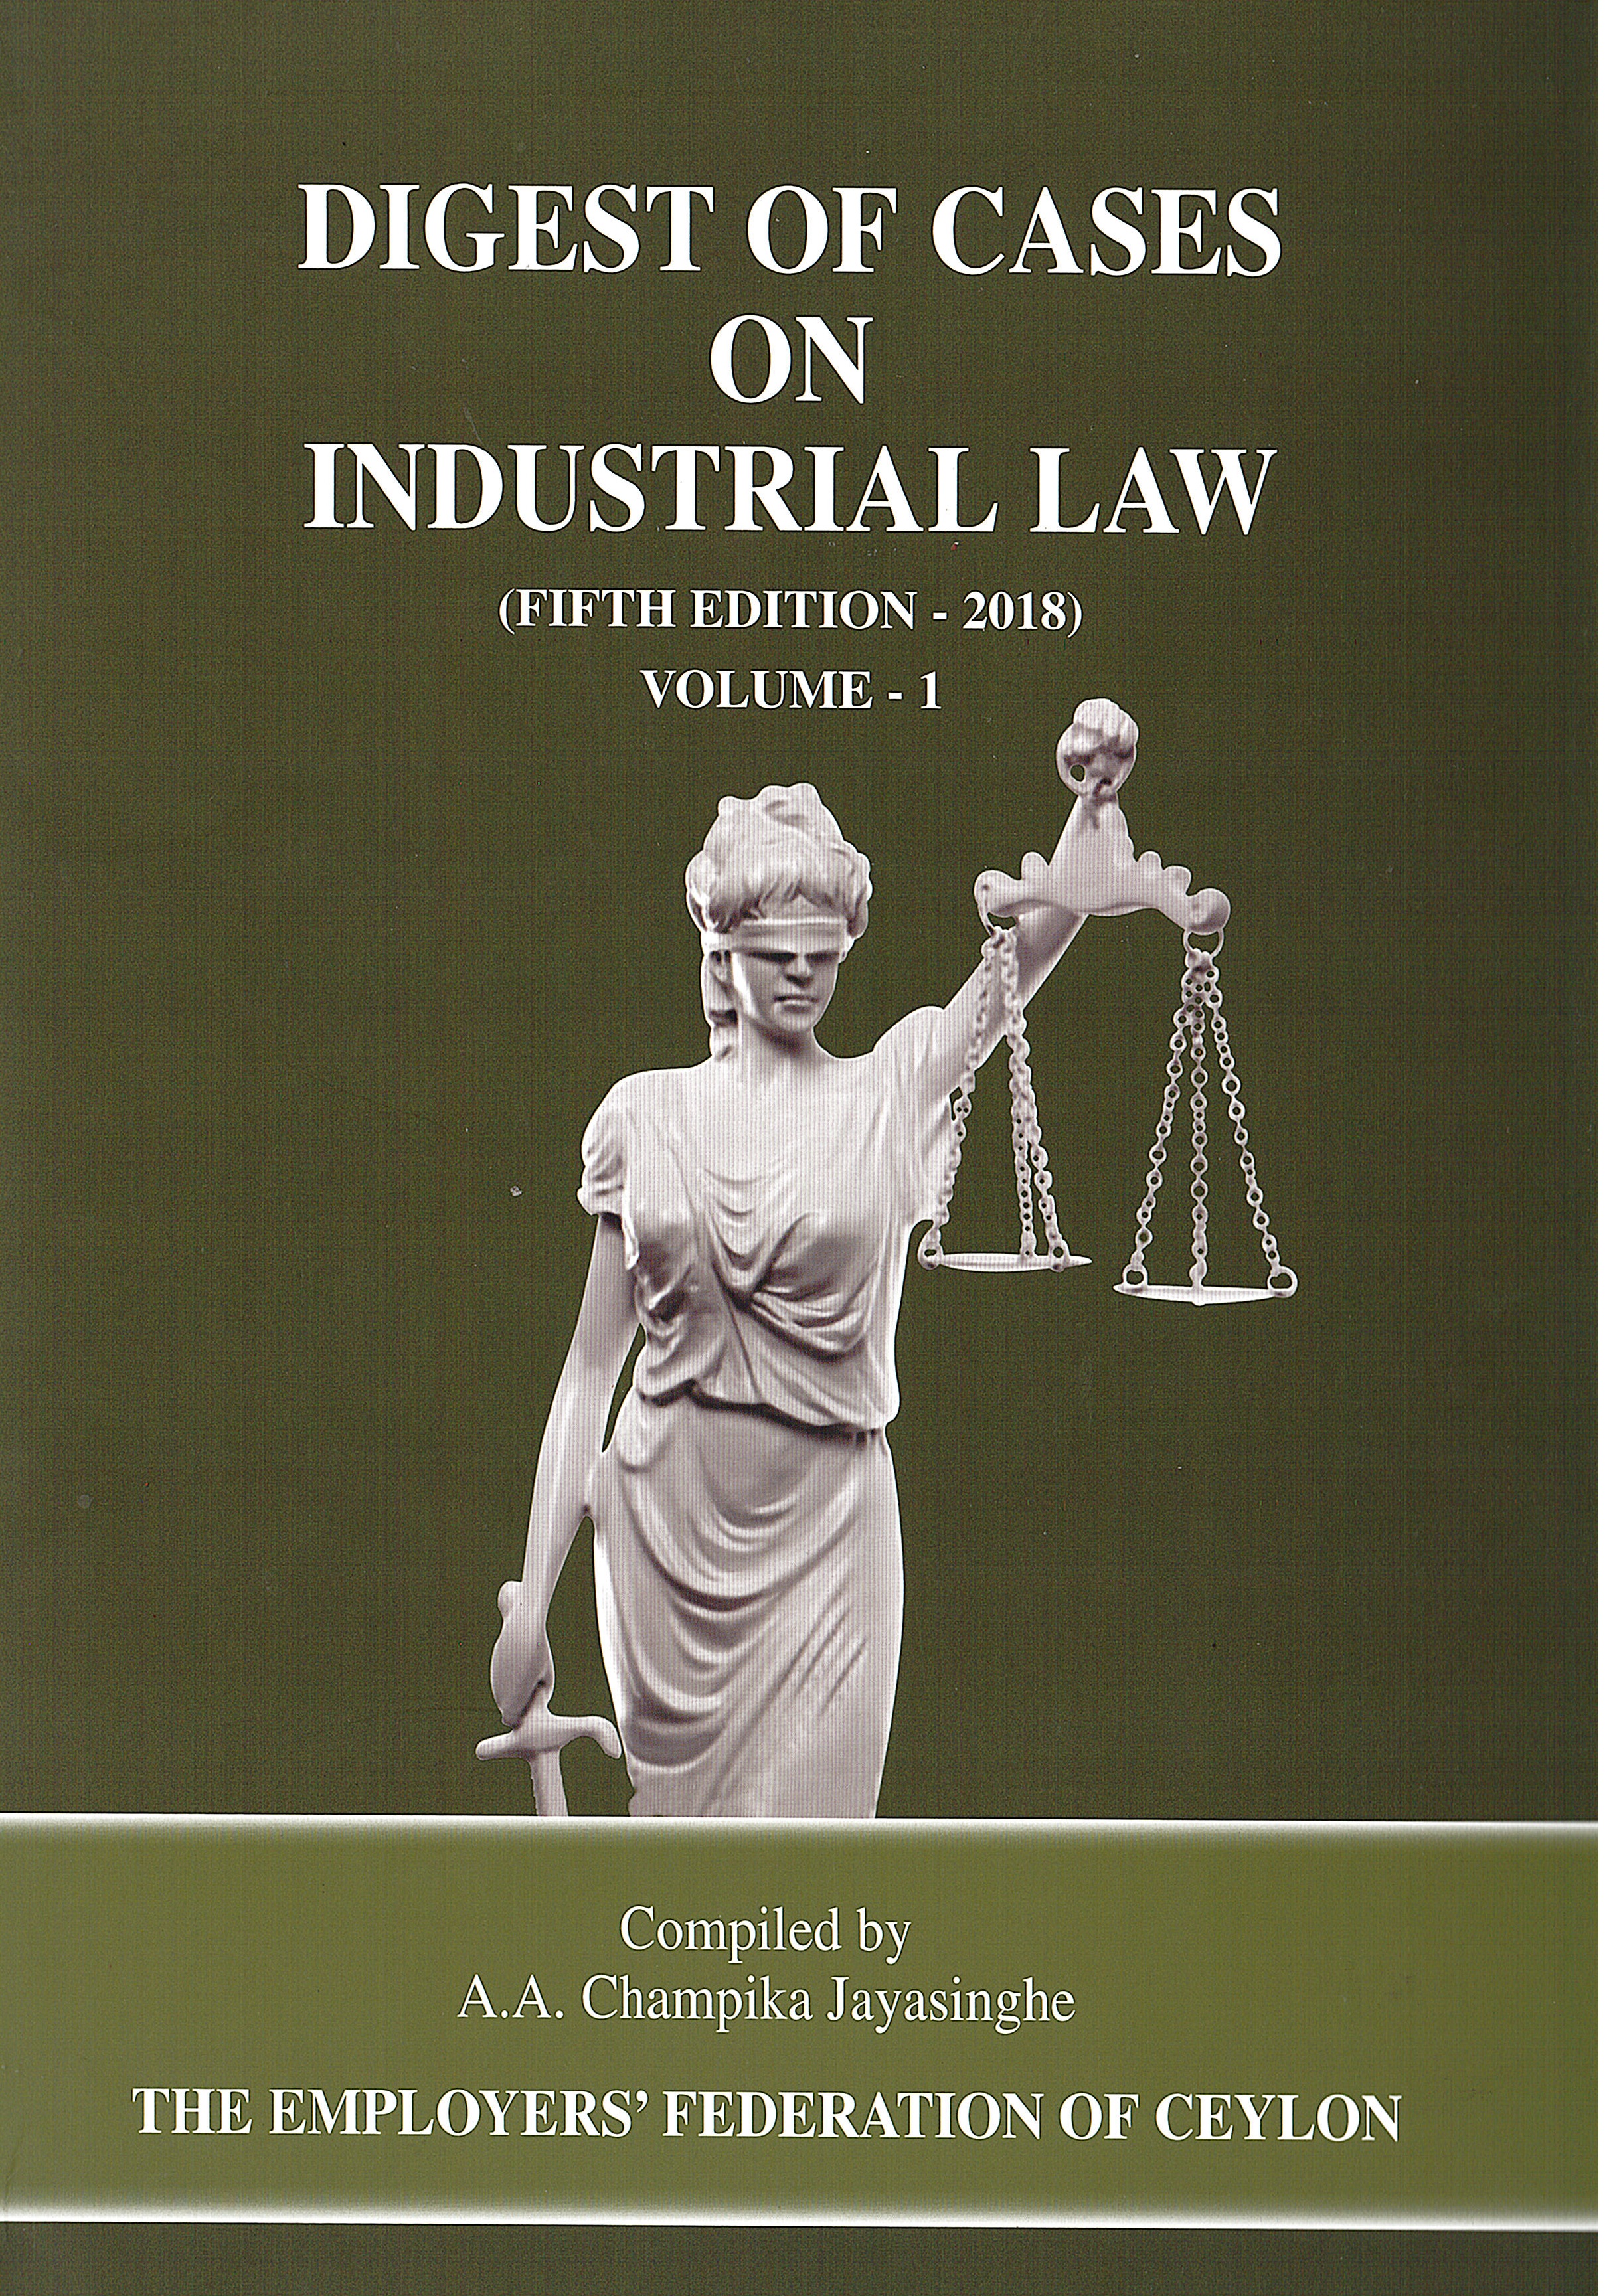 Digest of cases on industrial law : 5th edition - 2018  Volume-1